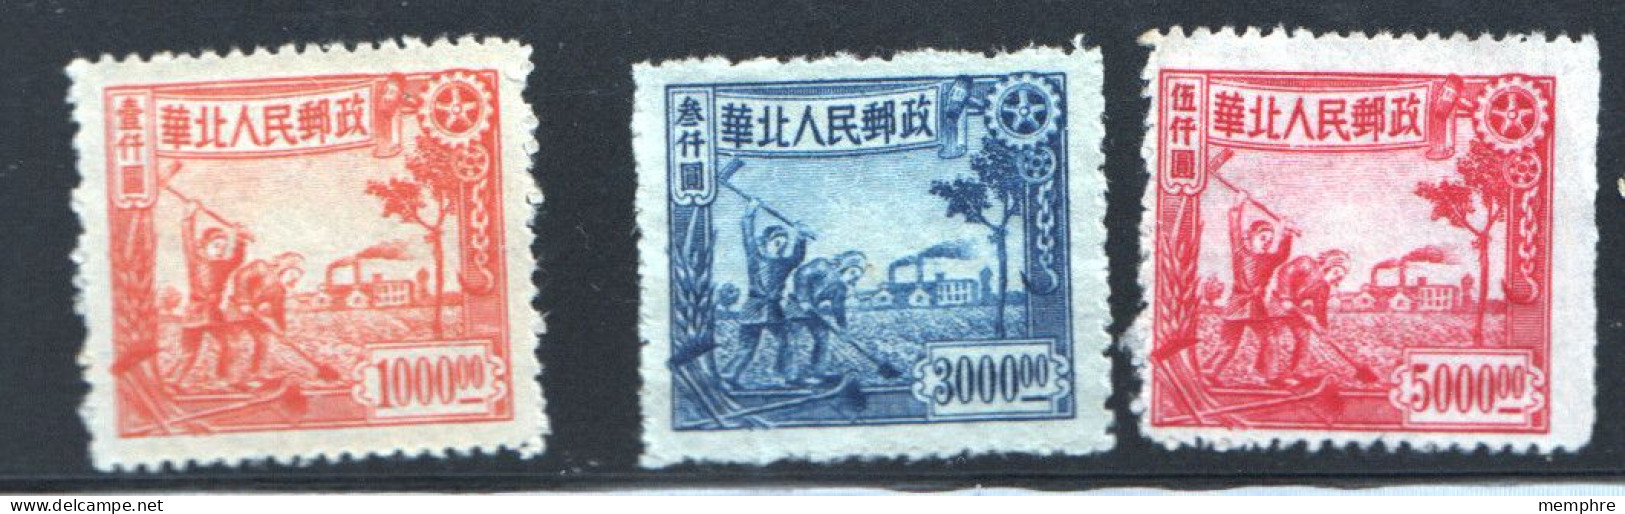 1949 North China Peasants And Actory Complete Set Of 3 Sc 3L96-8 No Gum, As Issued - Chine Du Nord 1949-50